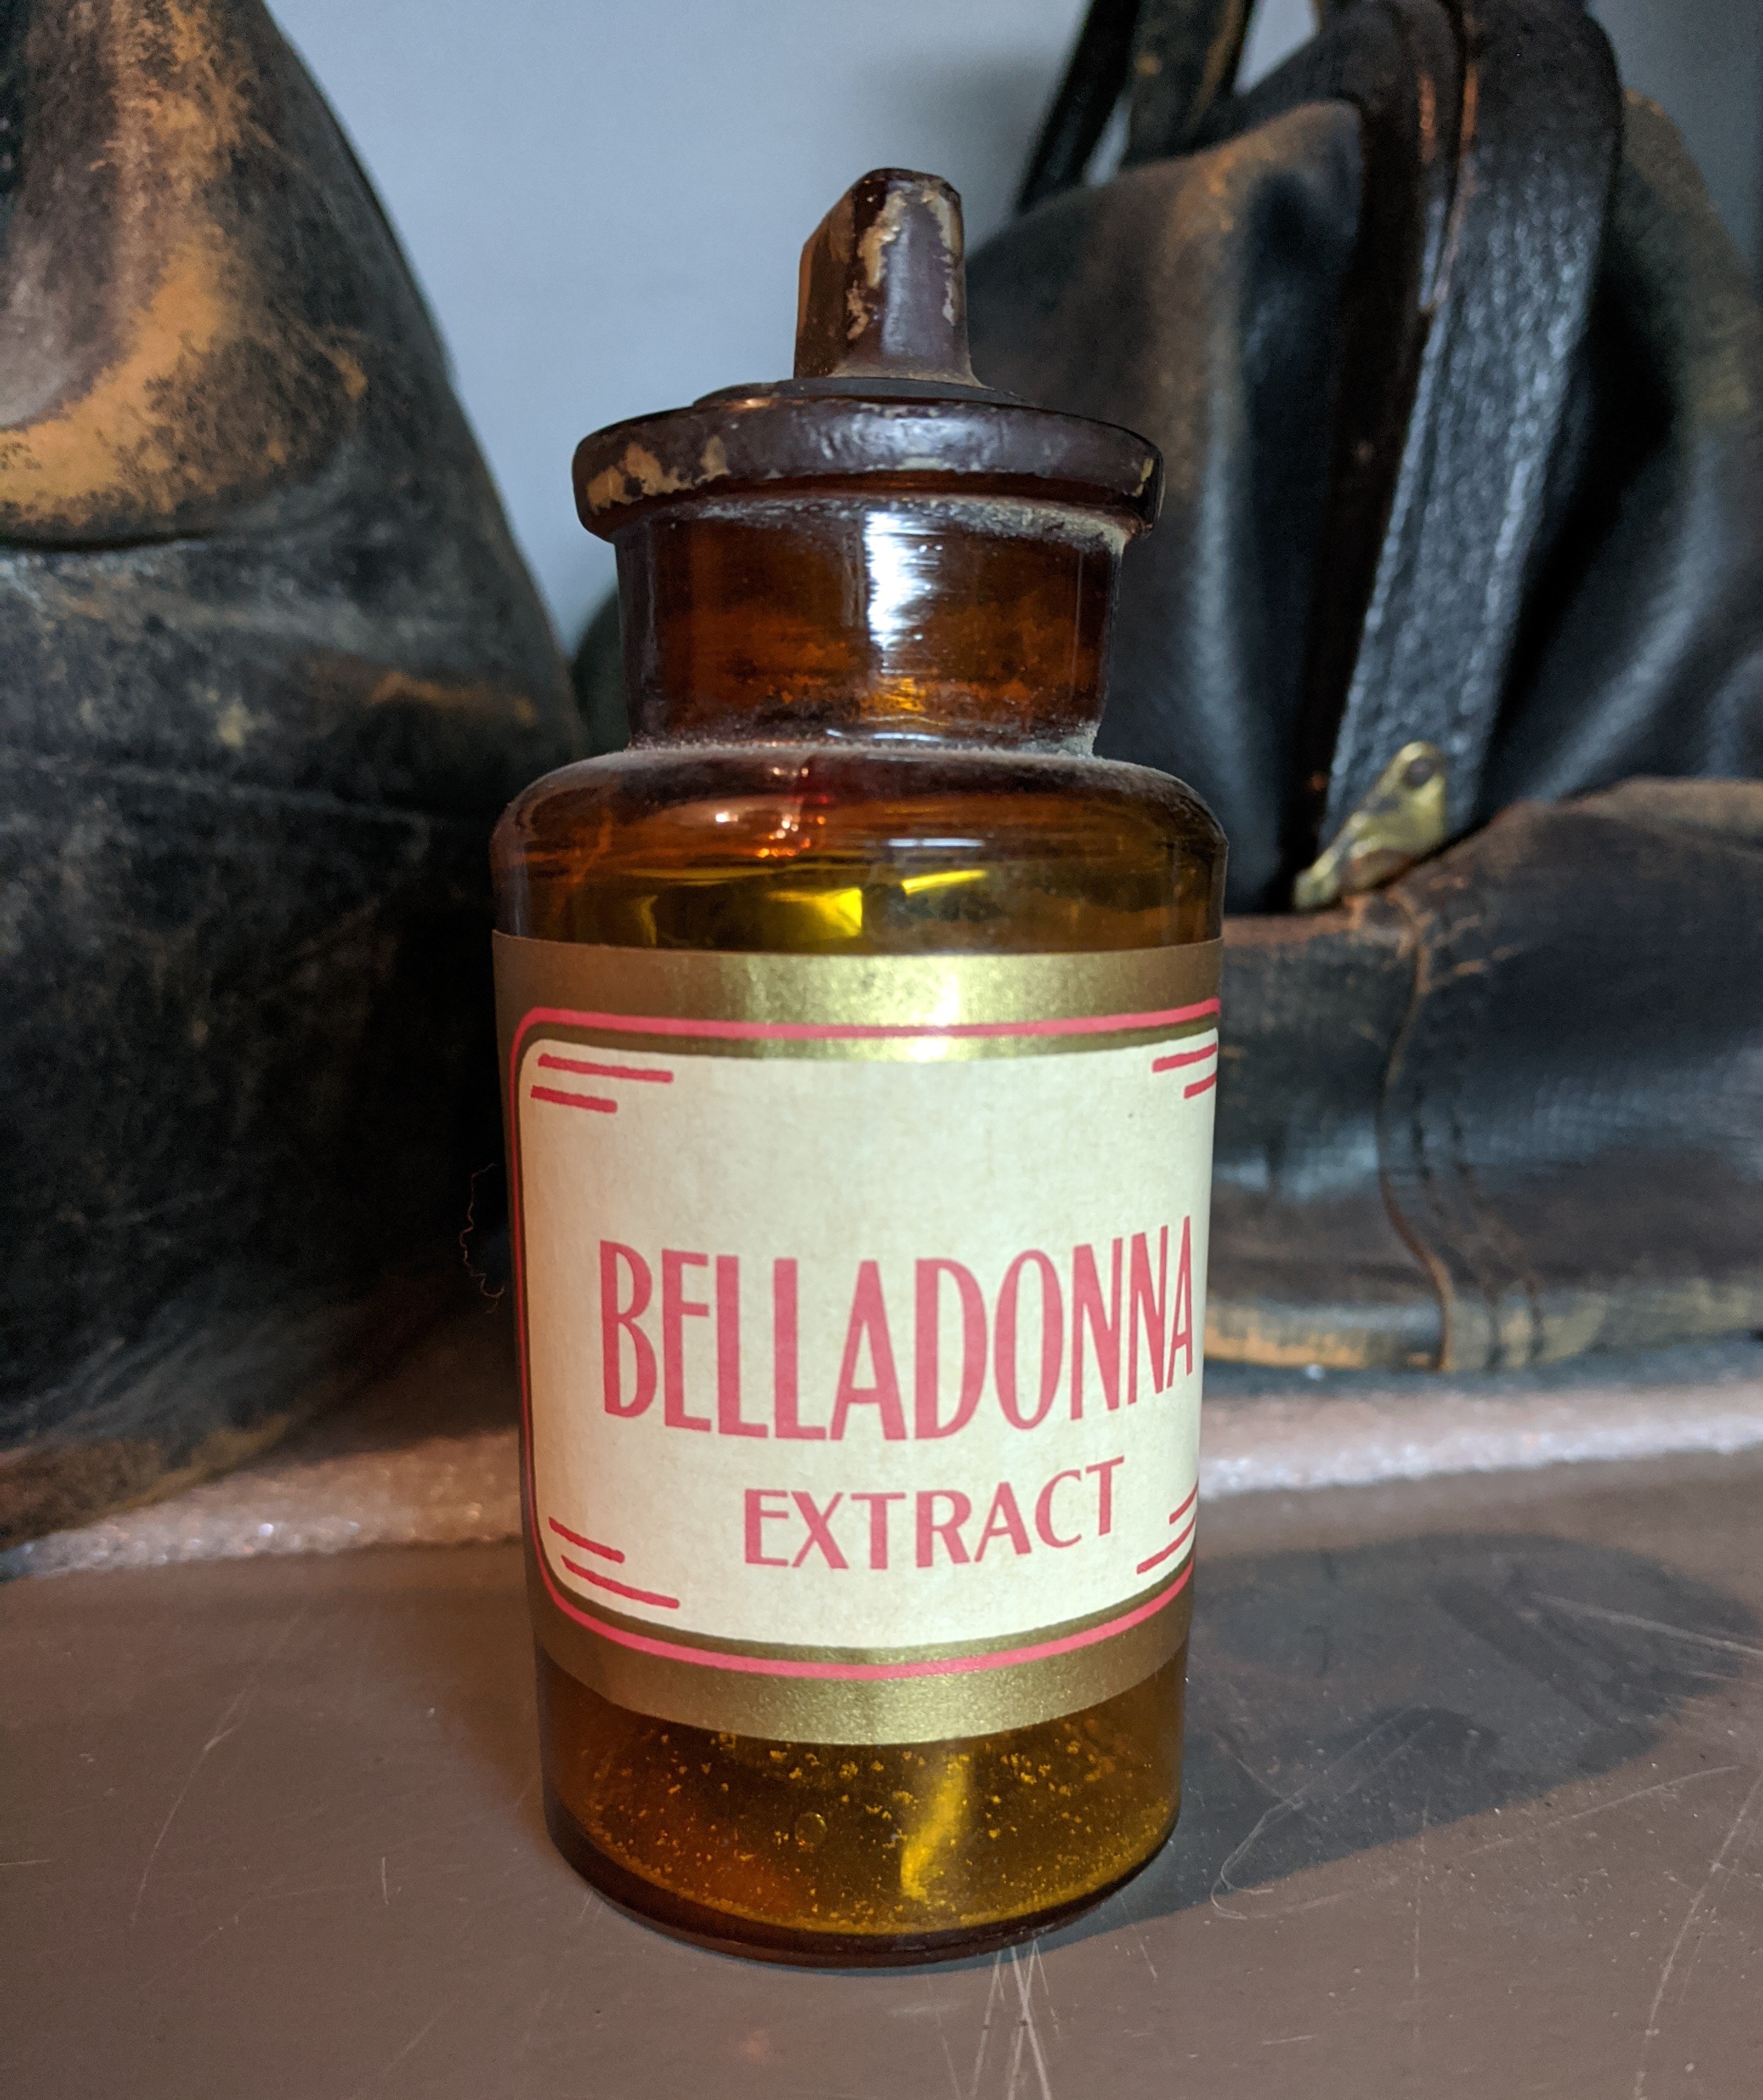 A bottle of Belladonna extract on a shelf.